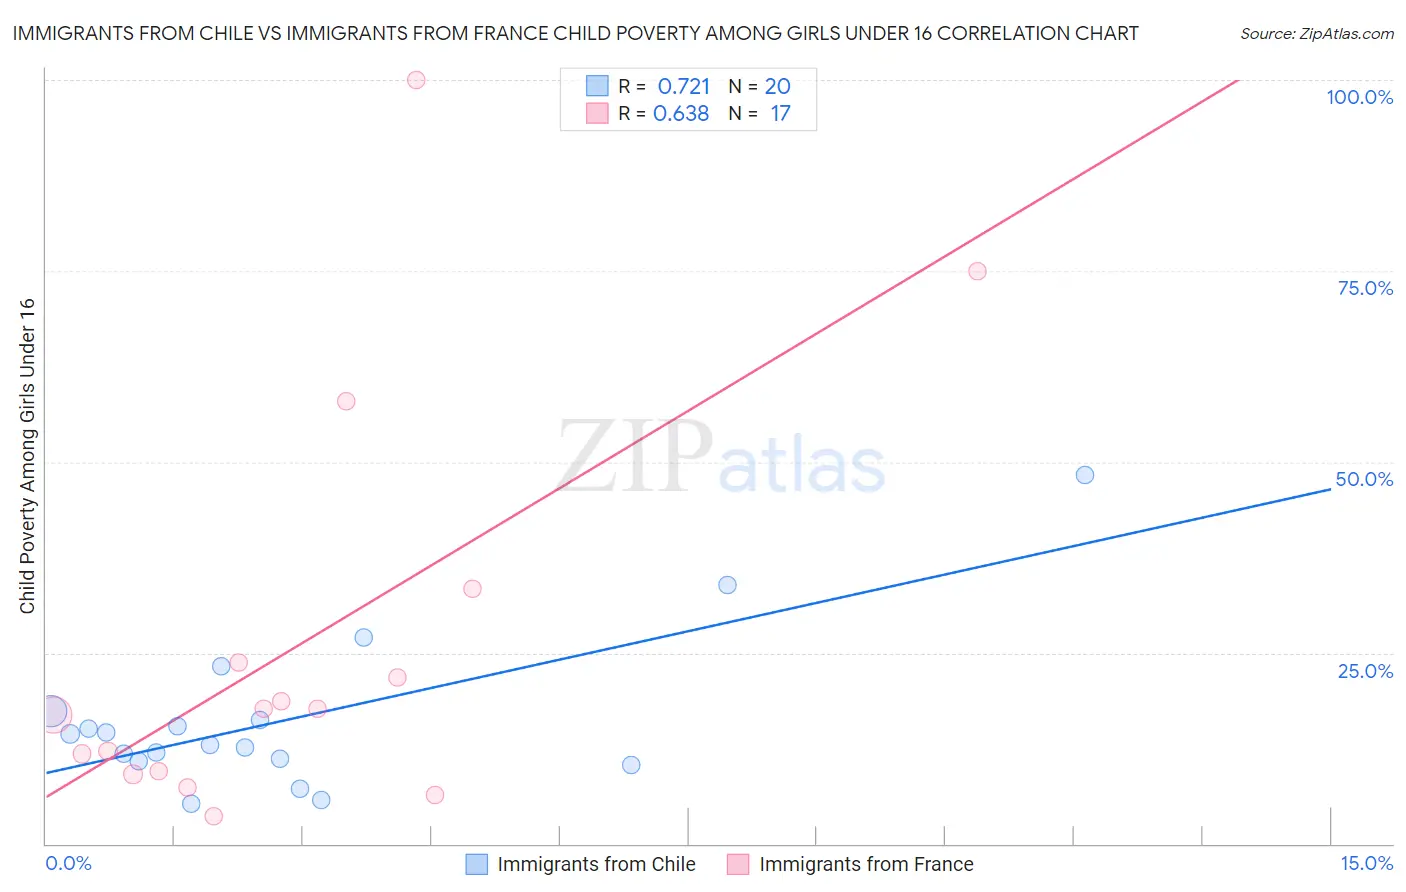 Immigrants from Chile vs Immigrants from France Child Poverty Among Girls Under 16